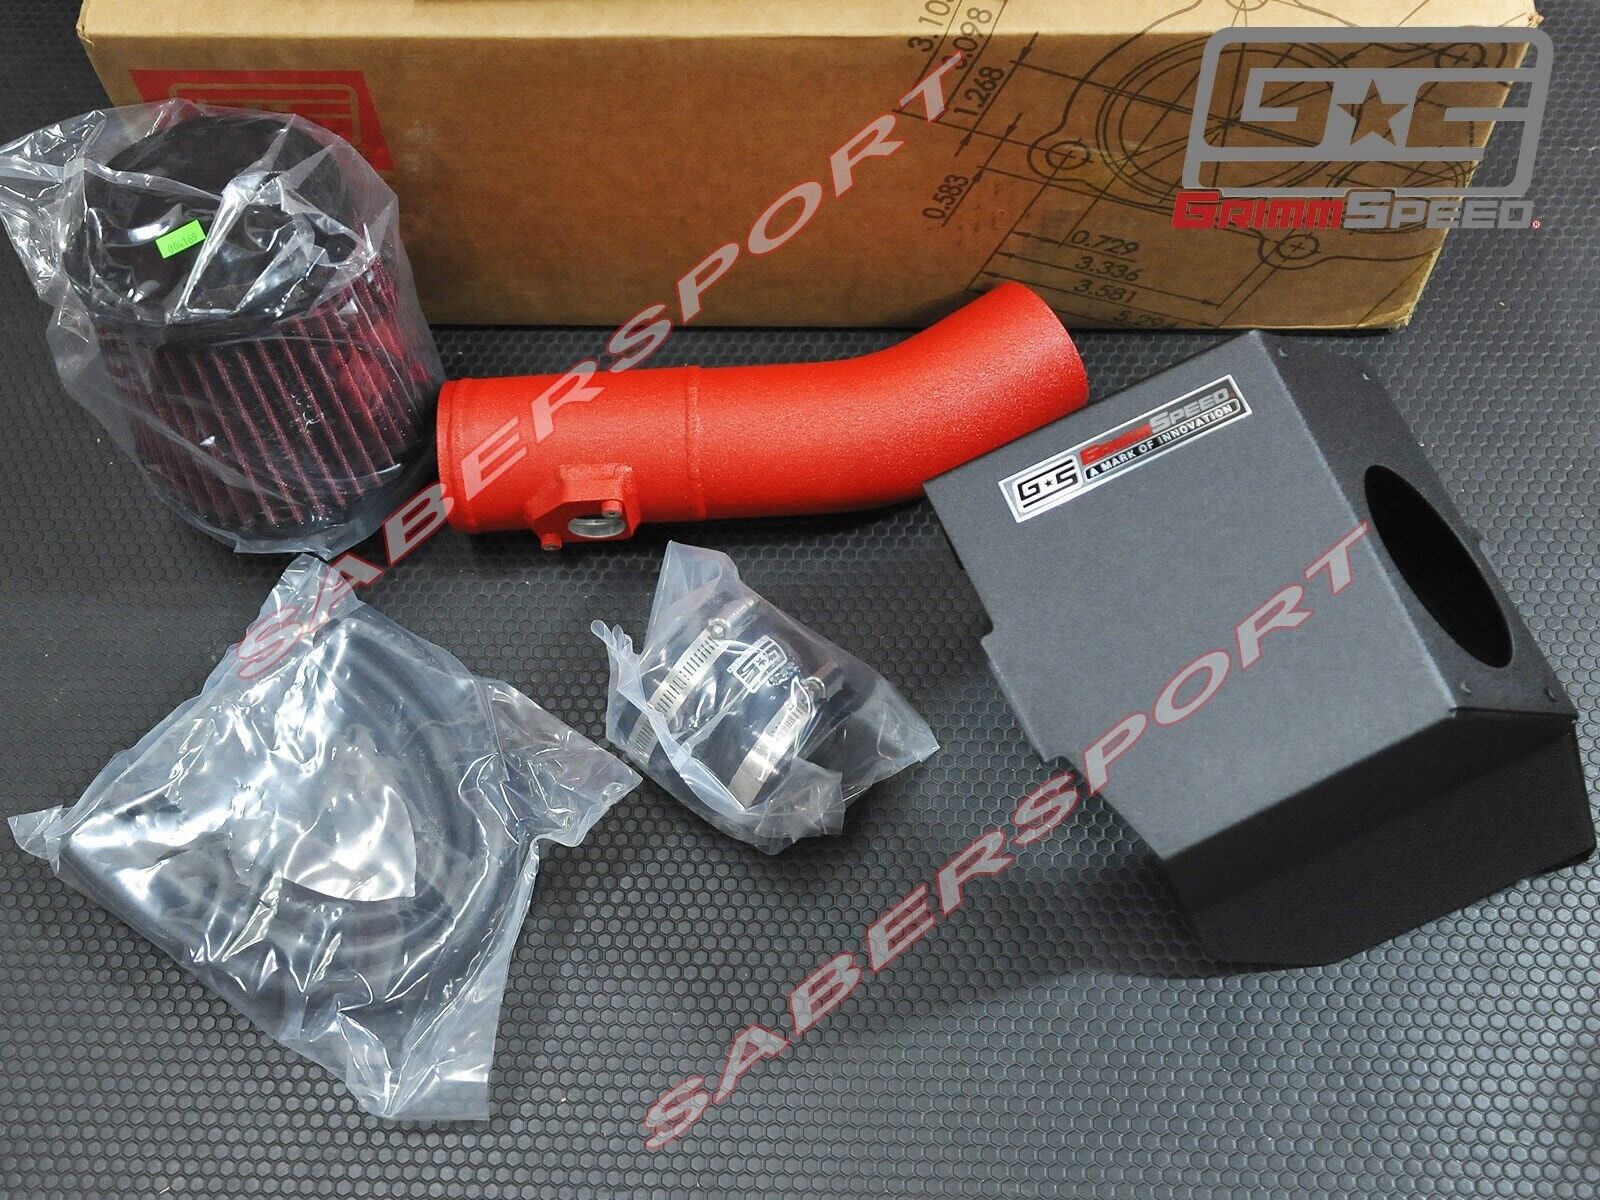 GrimmSpeed (Red) Cold Air Intake Kit for 2008-2014 WRX STI, 09-13 Forester XT